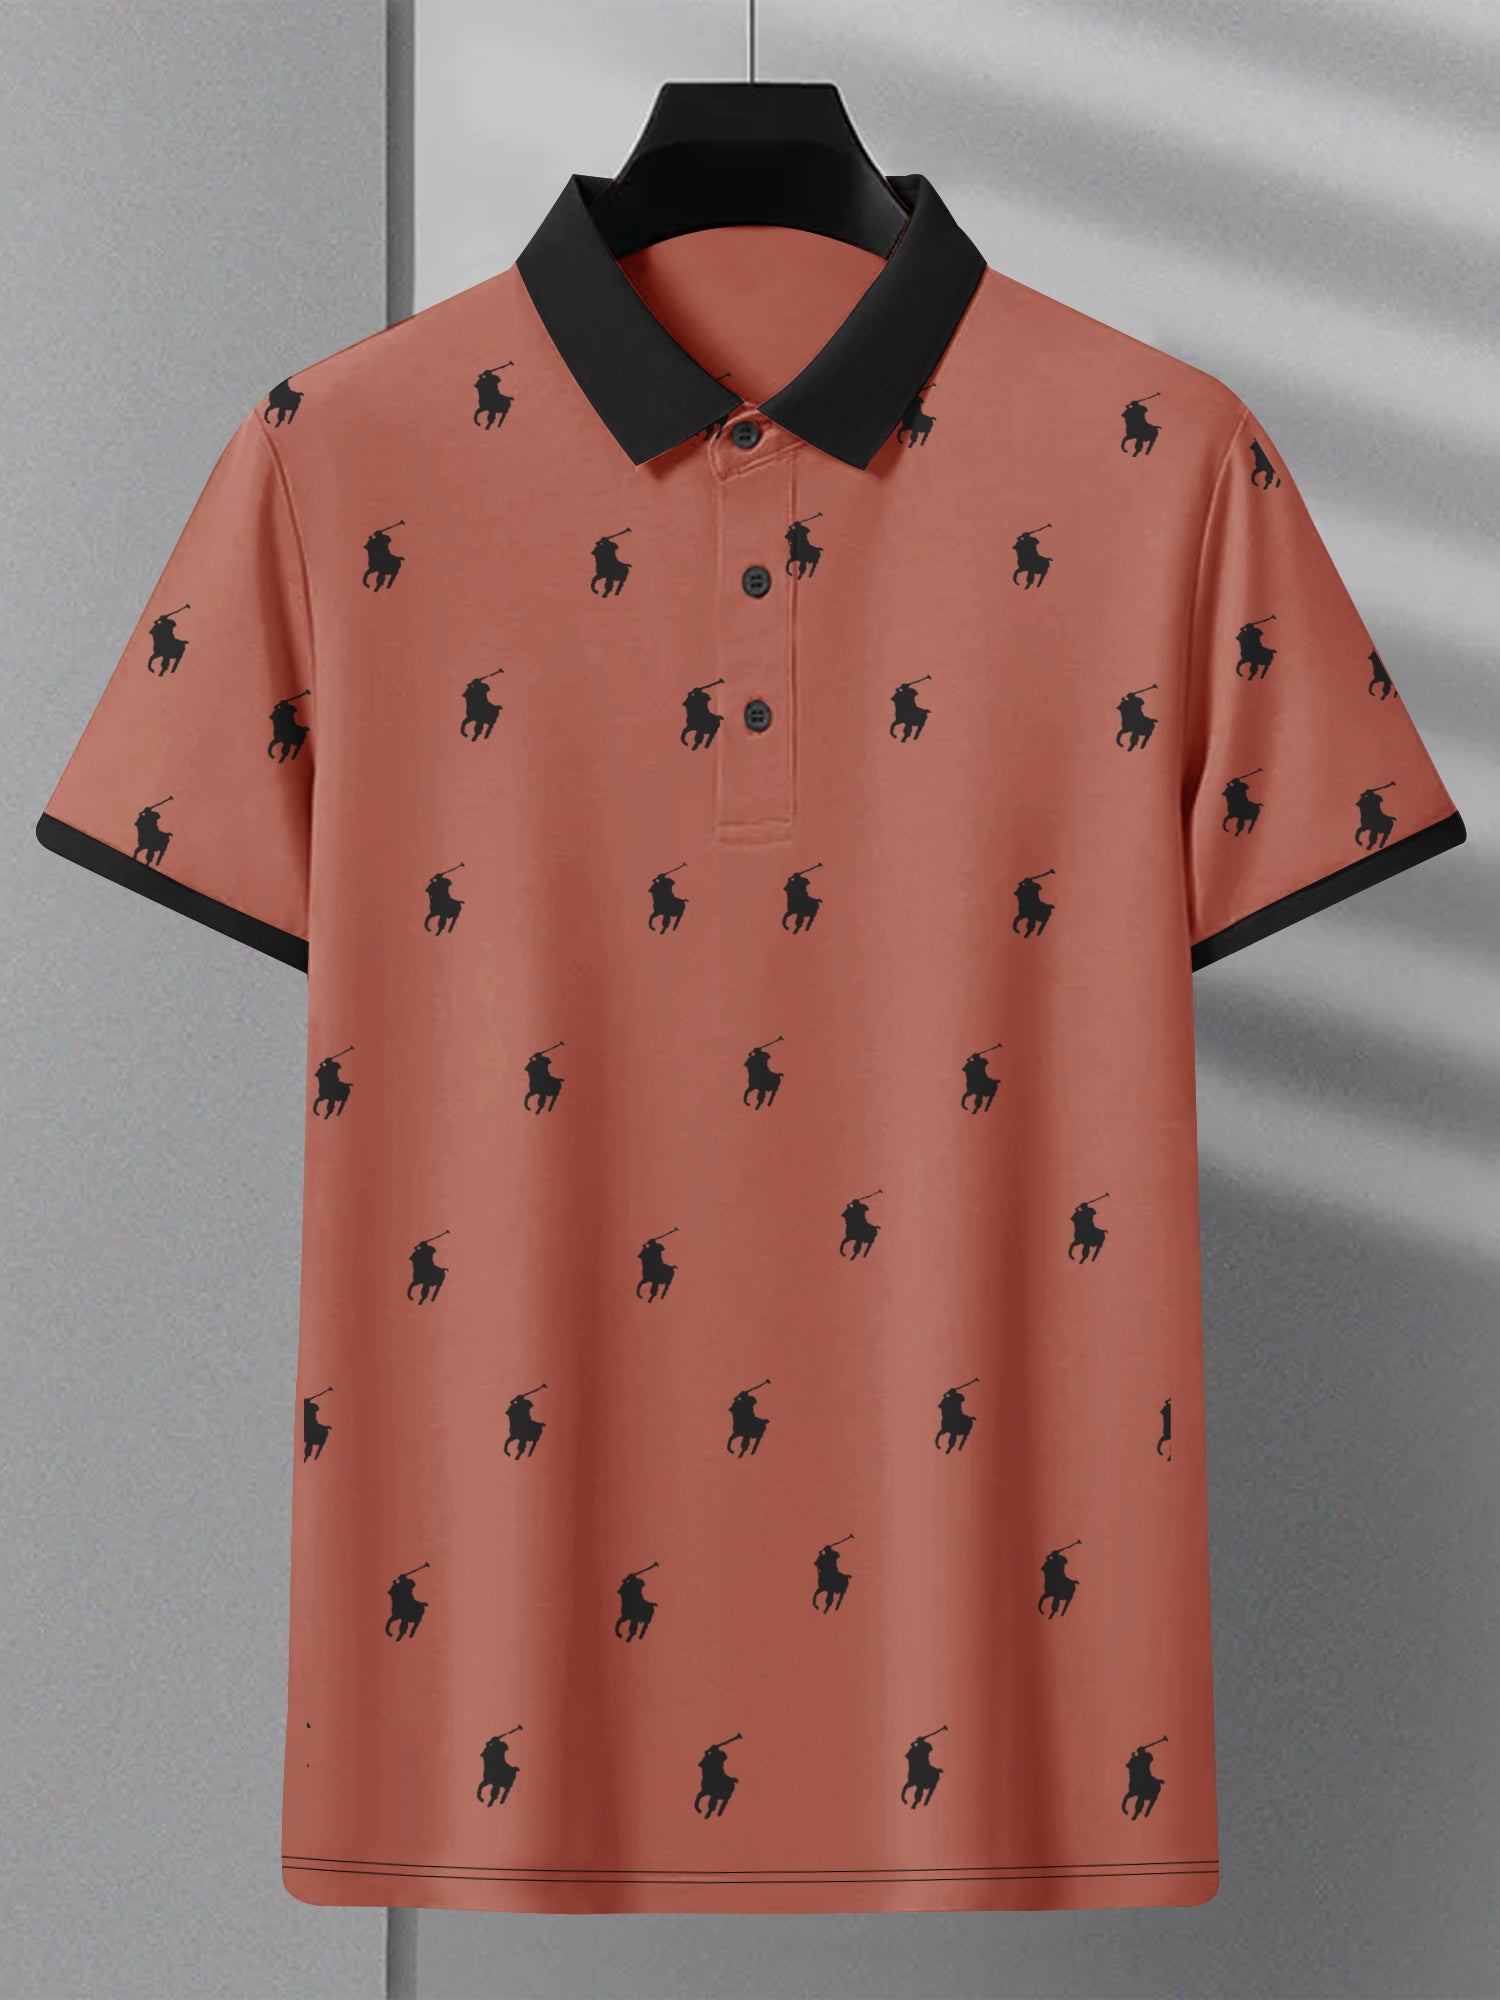 PRL Summer Polo Shirt For Men-Coral Orange with Allover Print-SP1449/RT2337